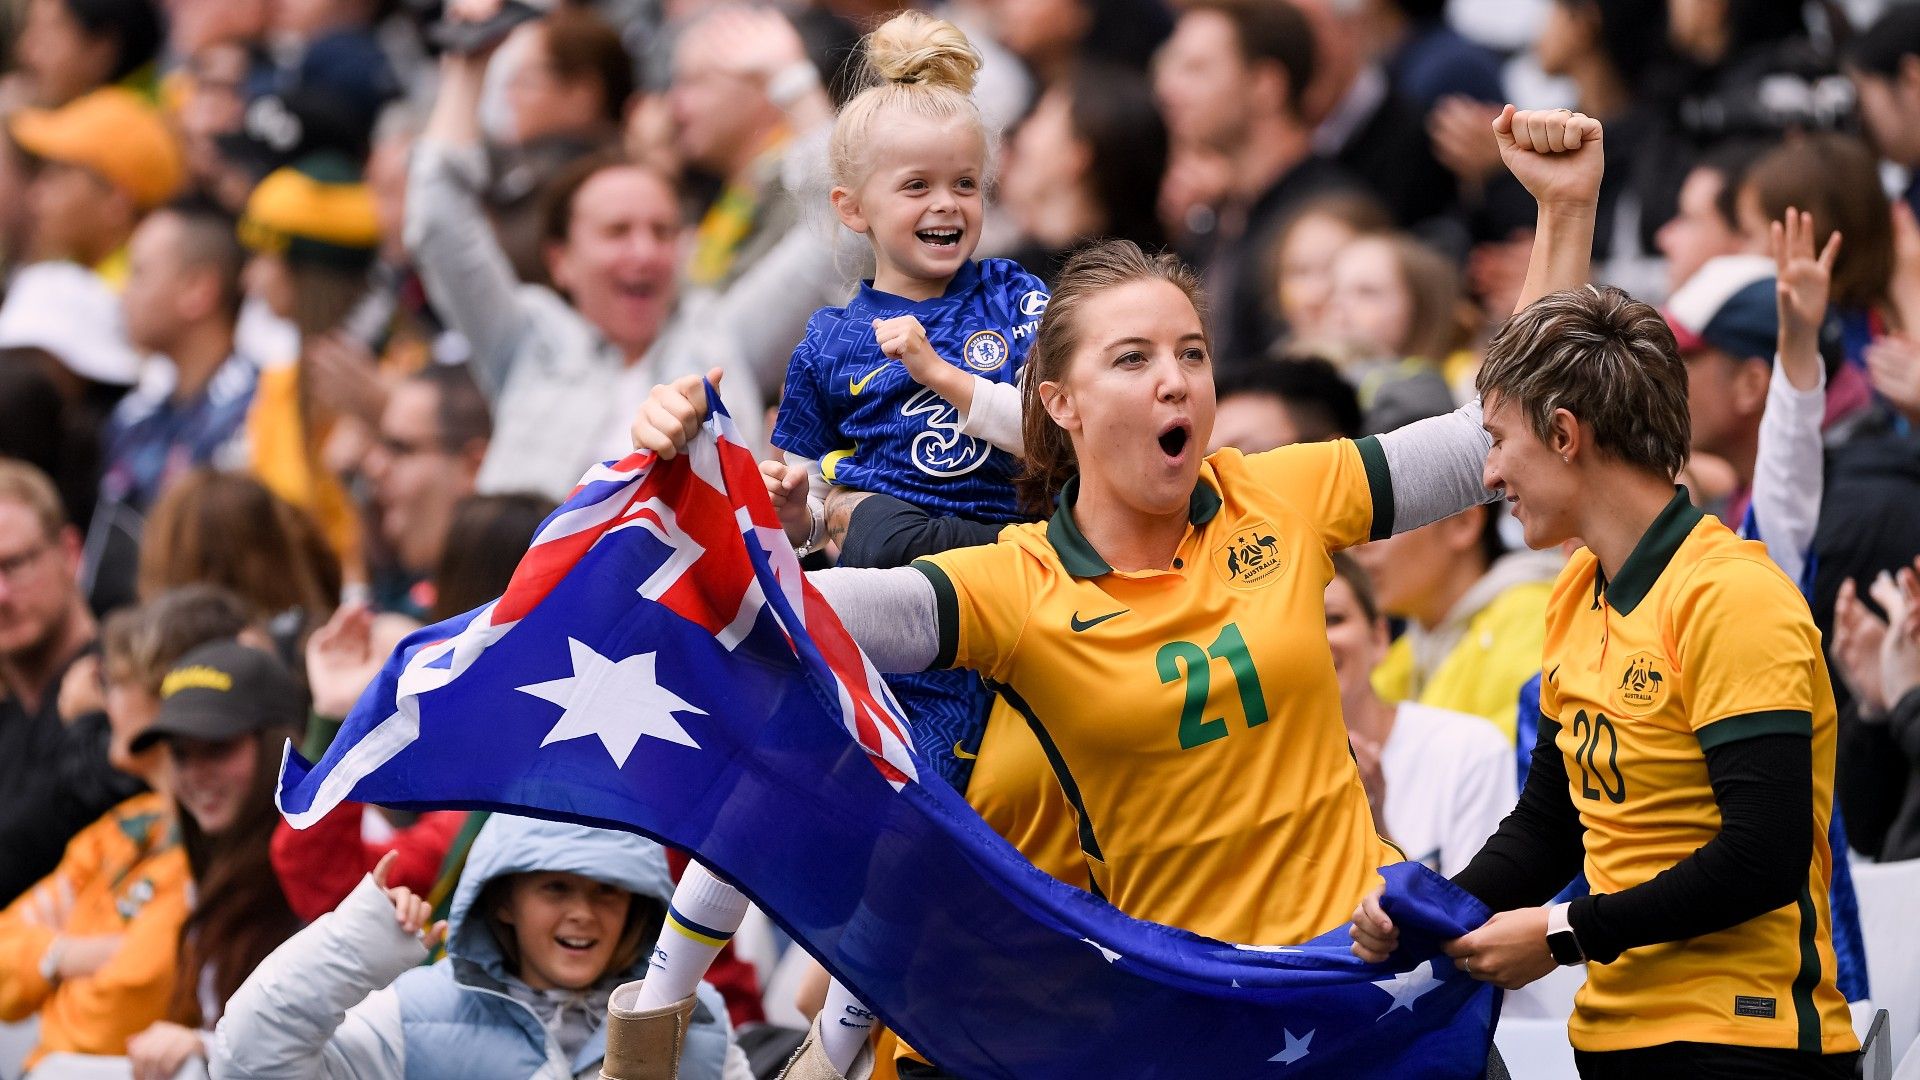 Matildas post record attendance for a women's football match in Australia at clash with USA